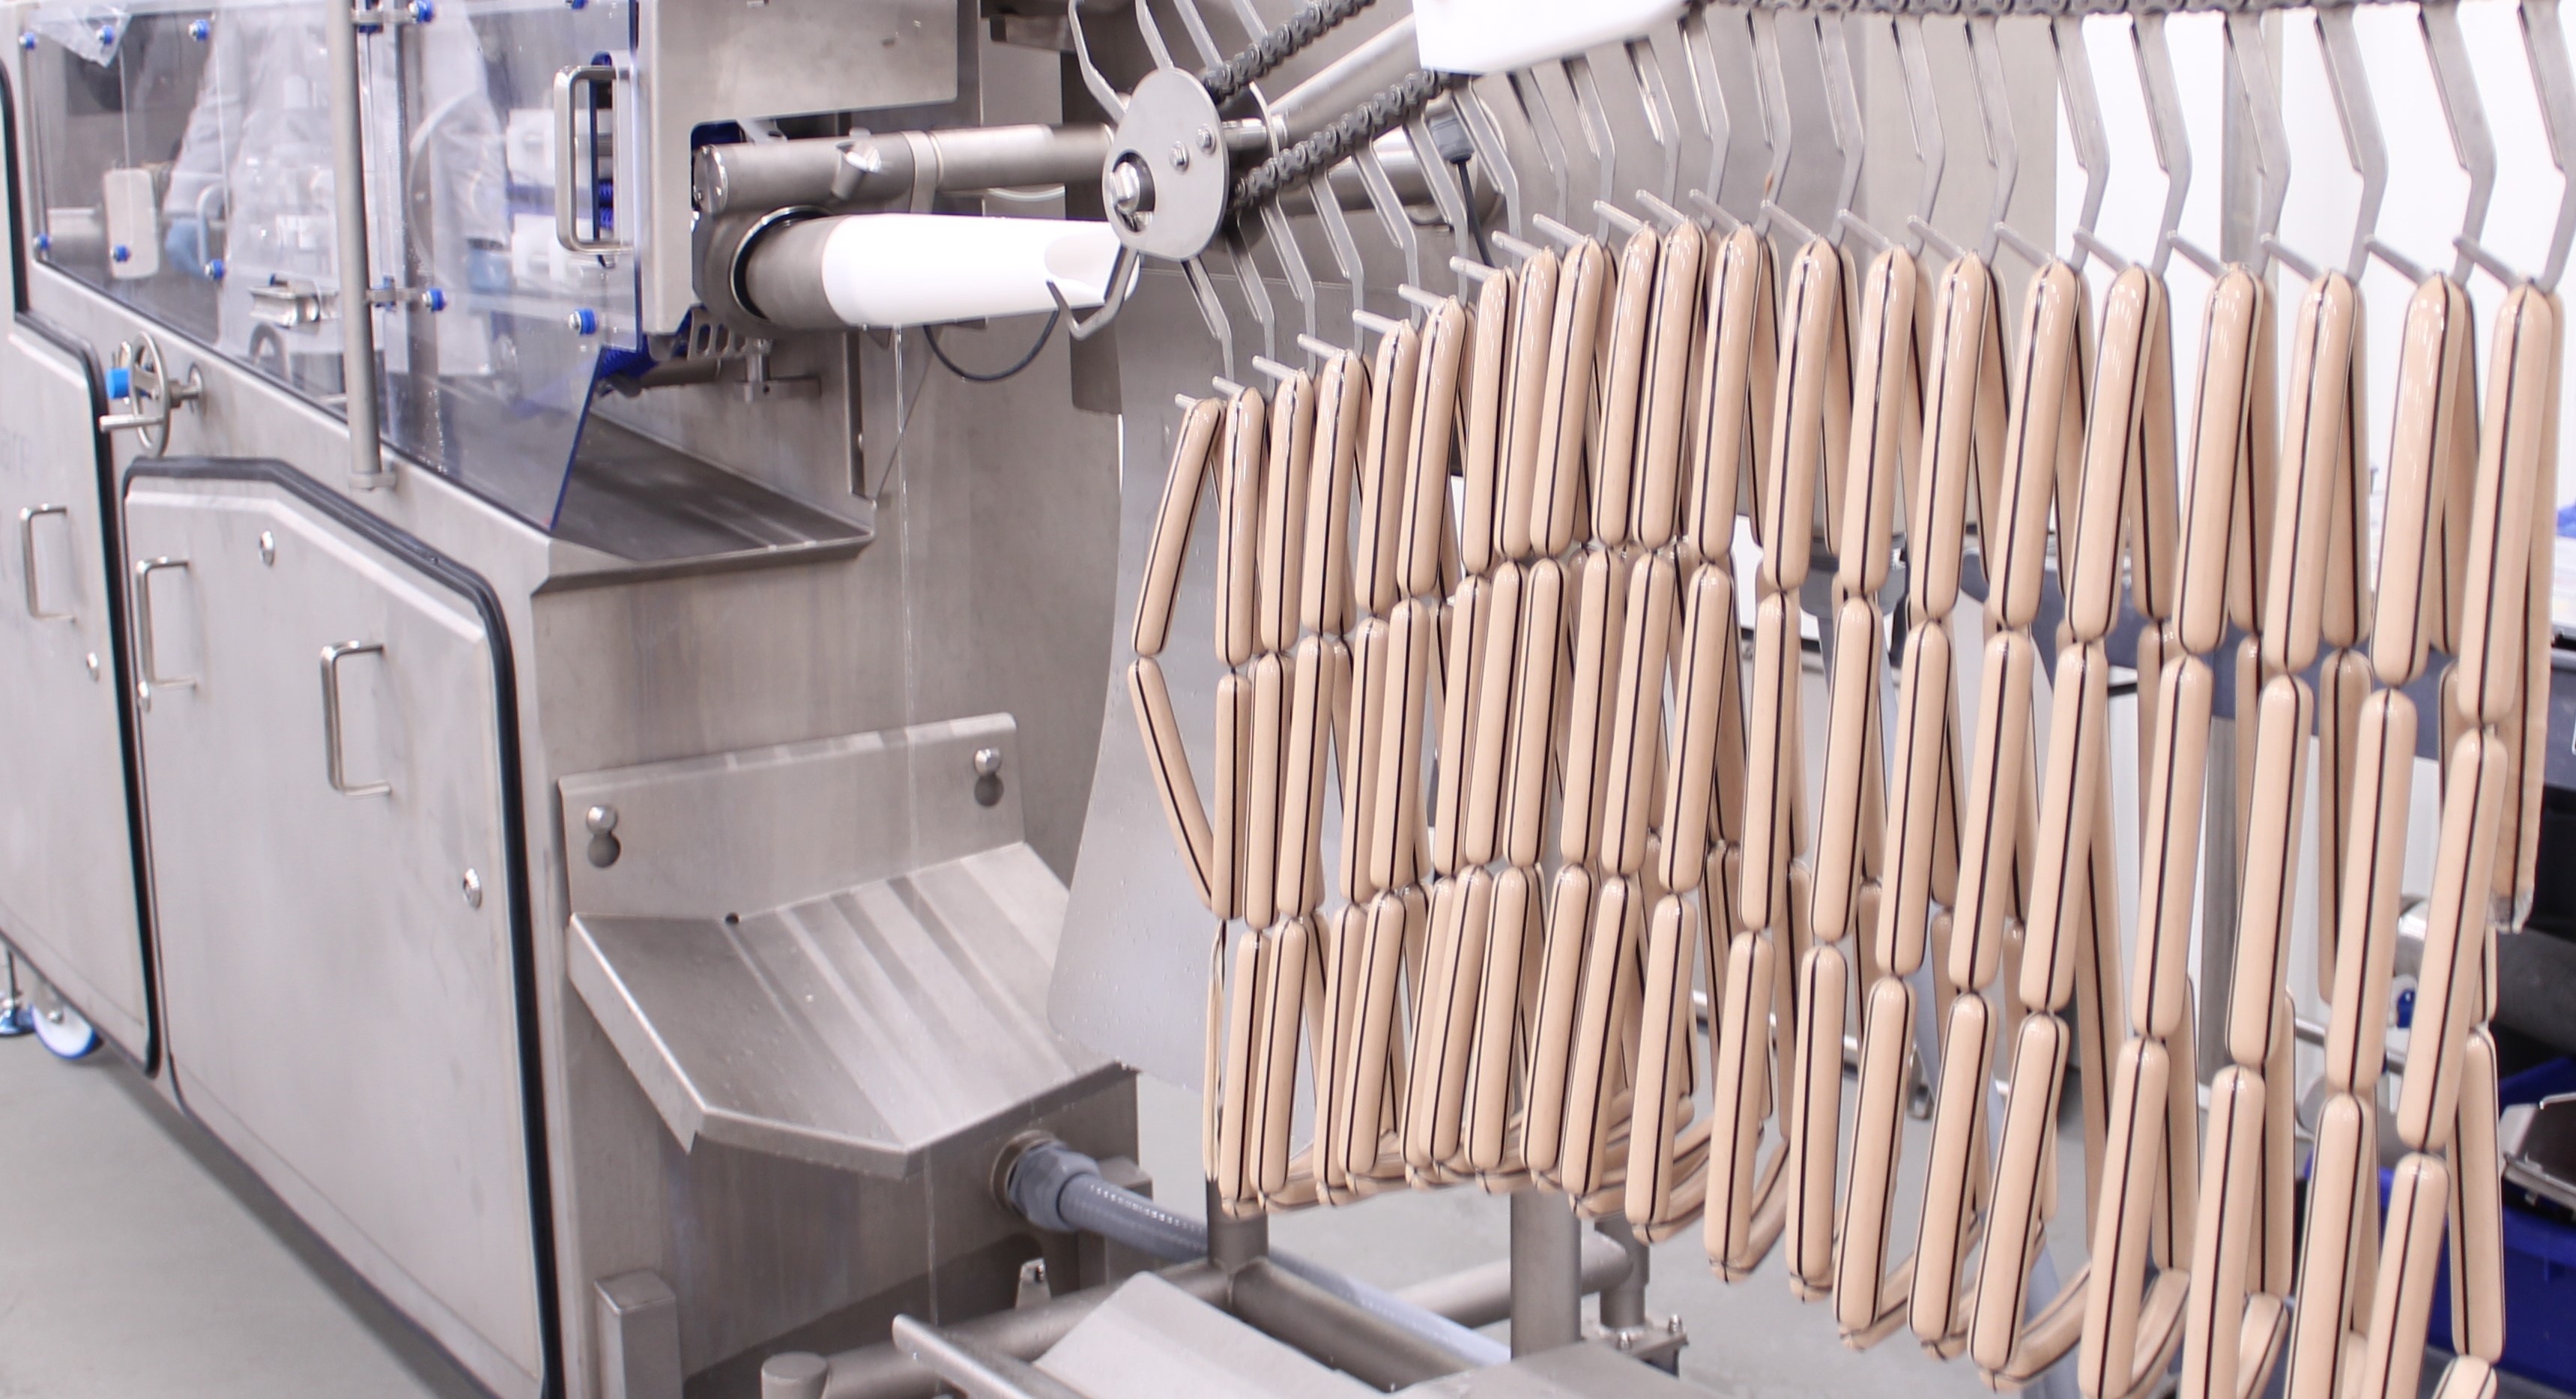 Marel presents a new solution for sausage making